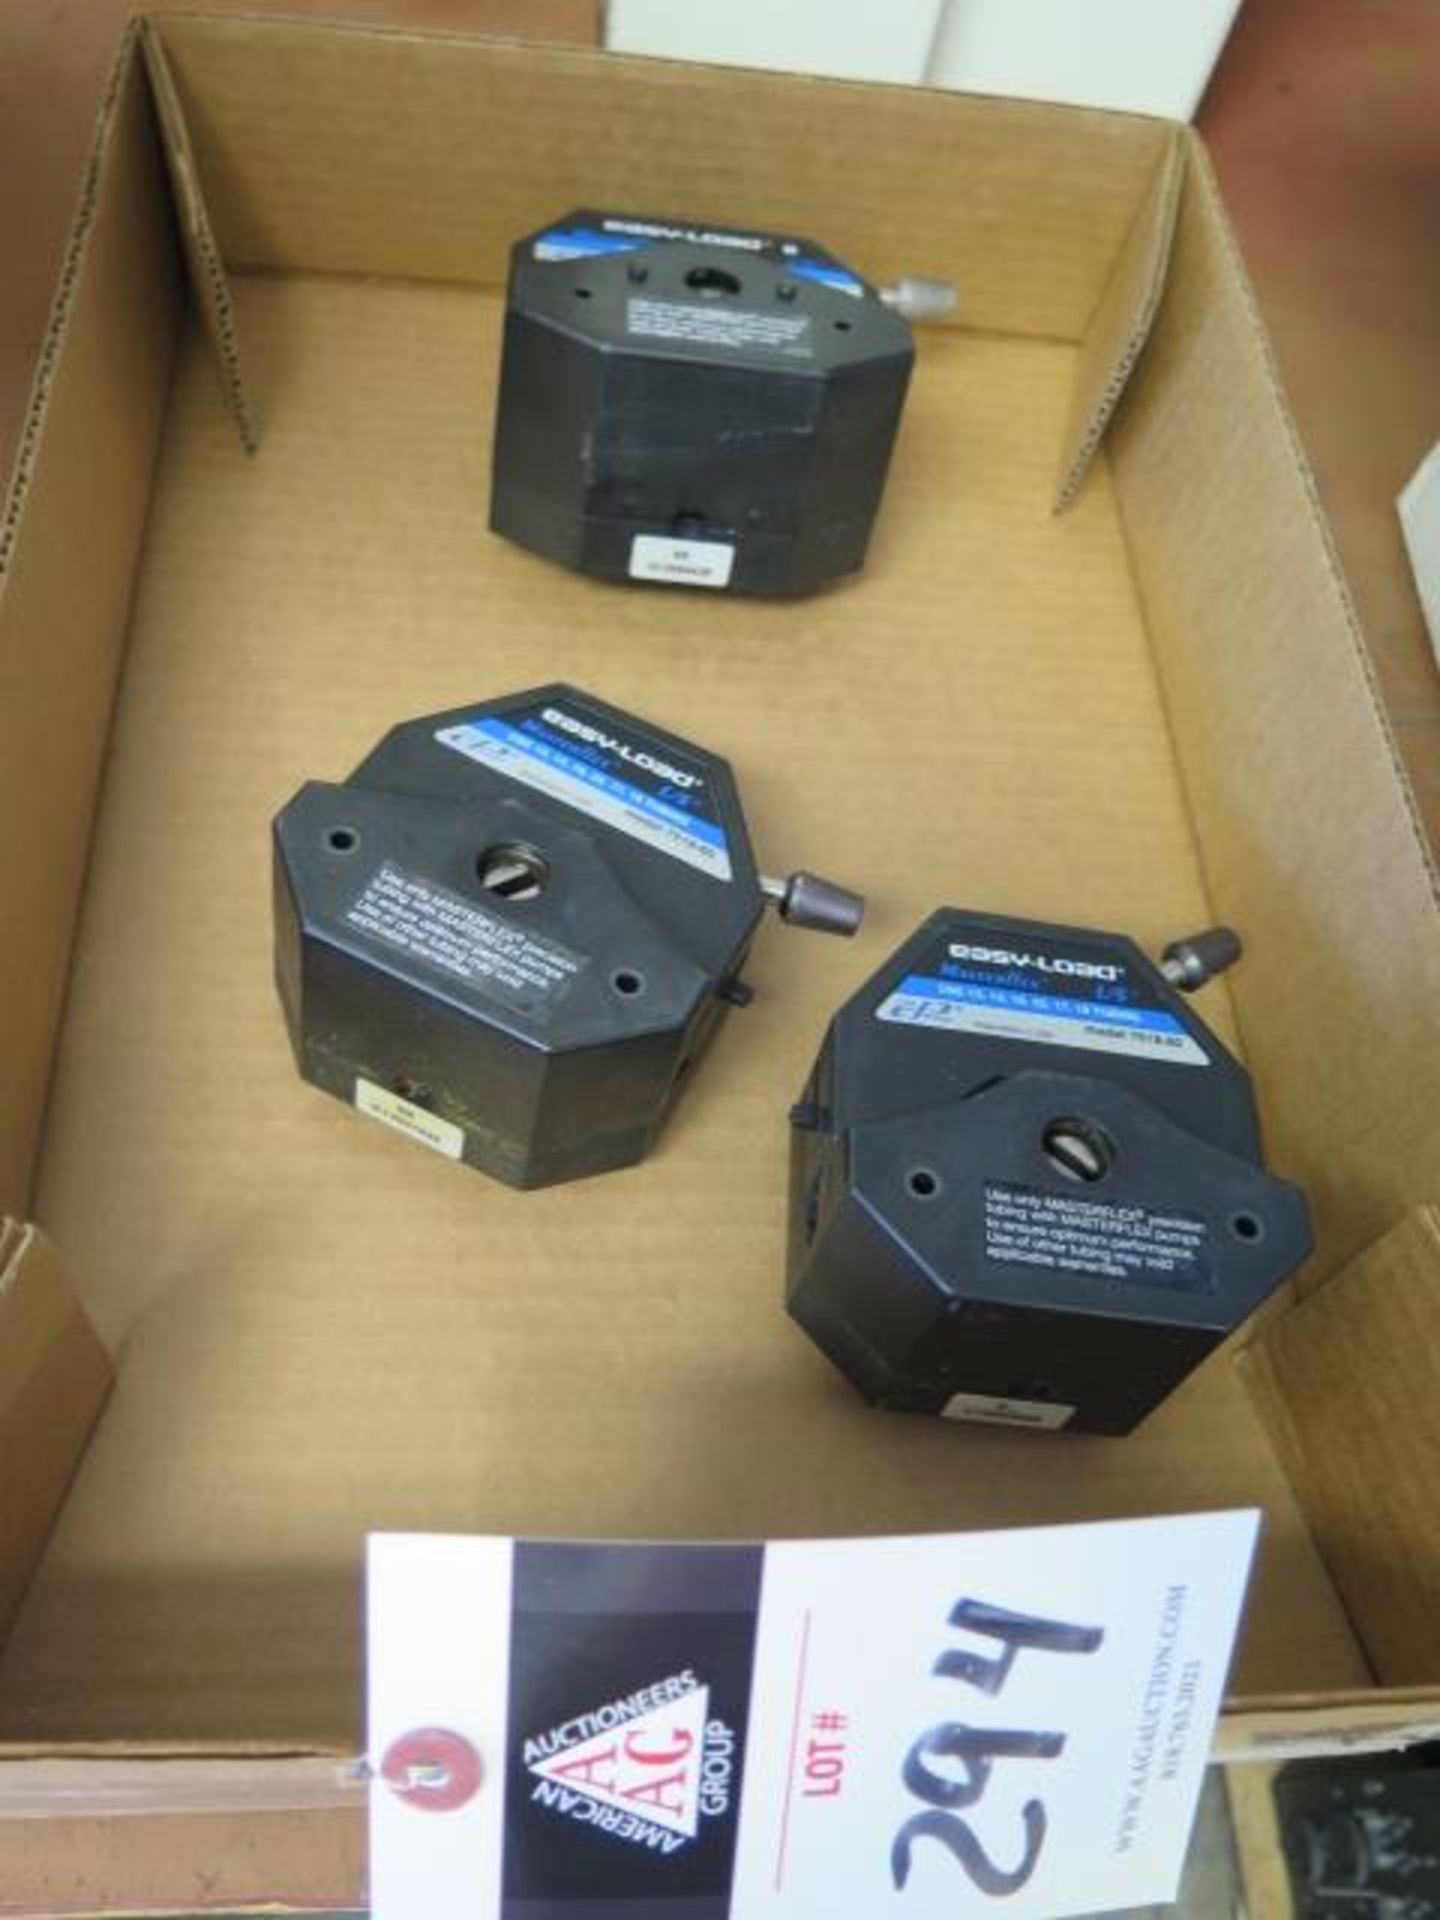 Cole-Parmer mdl. 77200-62 and 7518-61 Parastaltic Pump Heads (3) (SOLD AS-IS - NO WARRANTY)